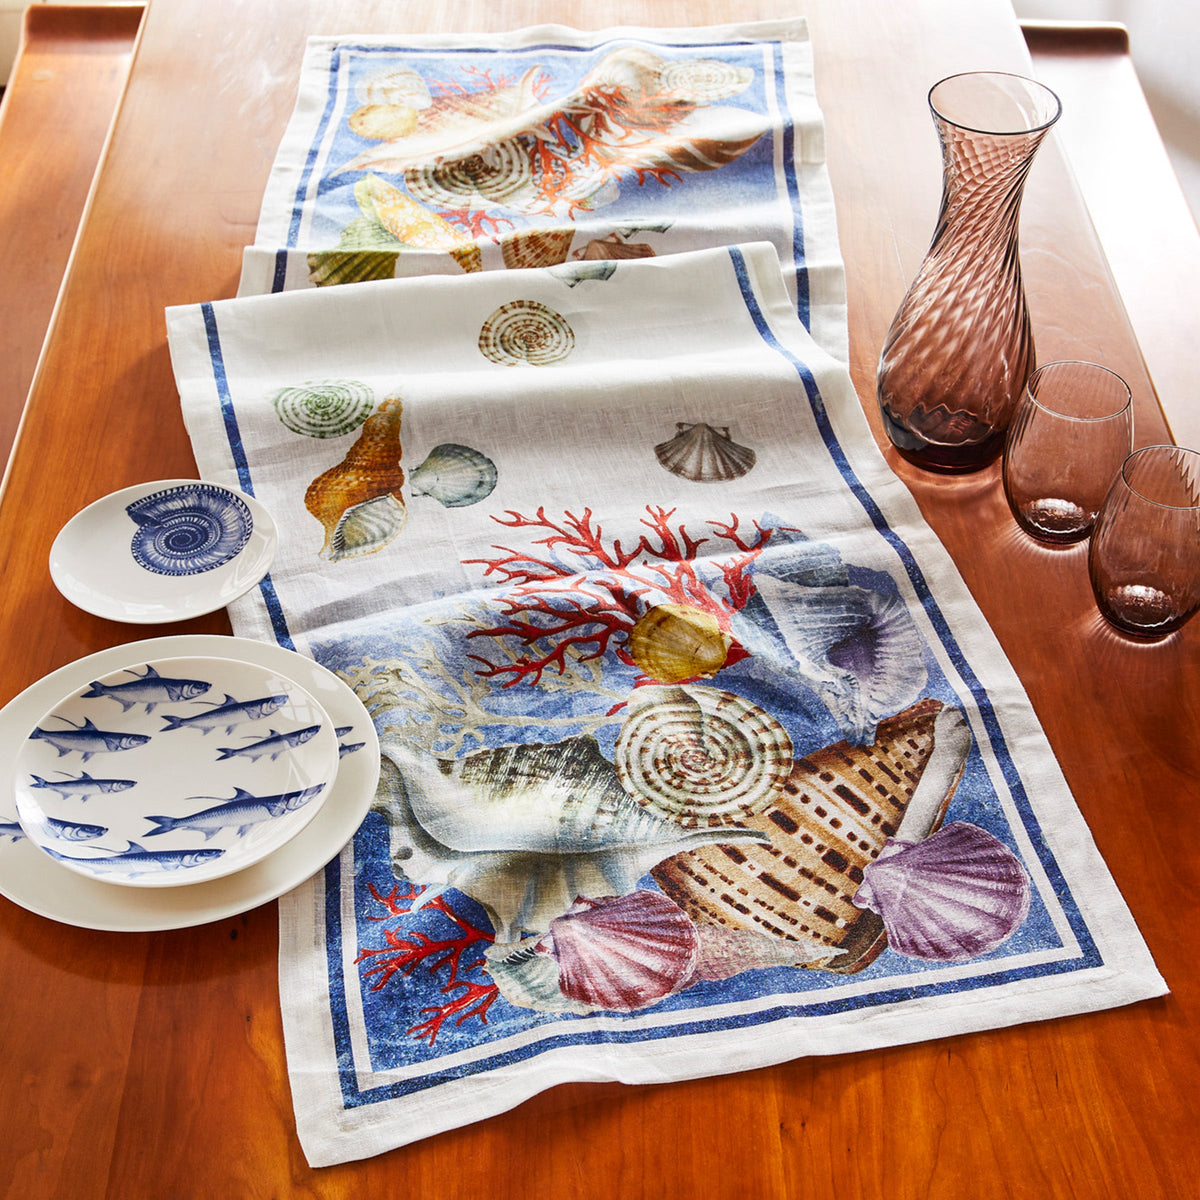 Sanibel Table Runner with shells and color in watercolors on Italian Linen from Caskata